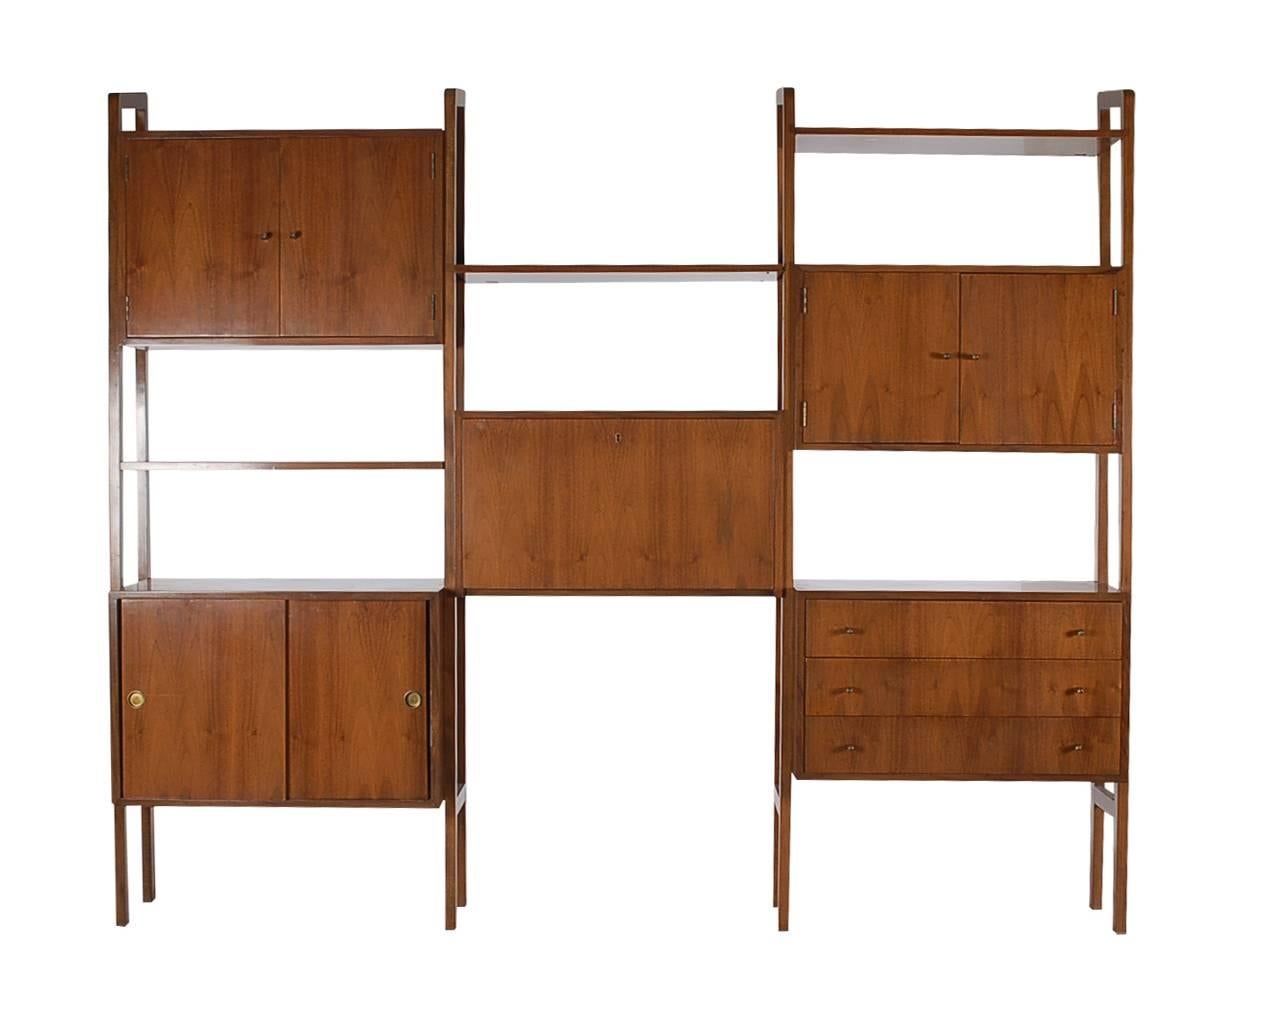 A large freestanding wall unit with tons of functionality it features solid walnut construction, several cabinets, shelves, and pull down secretary desk.

In the style of Poul Cadovius.